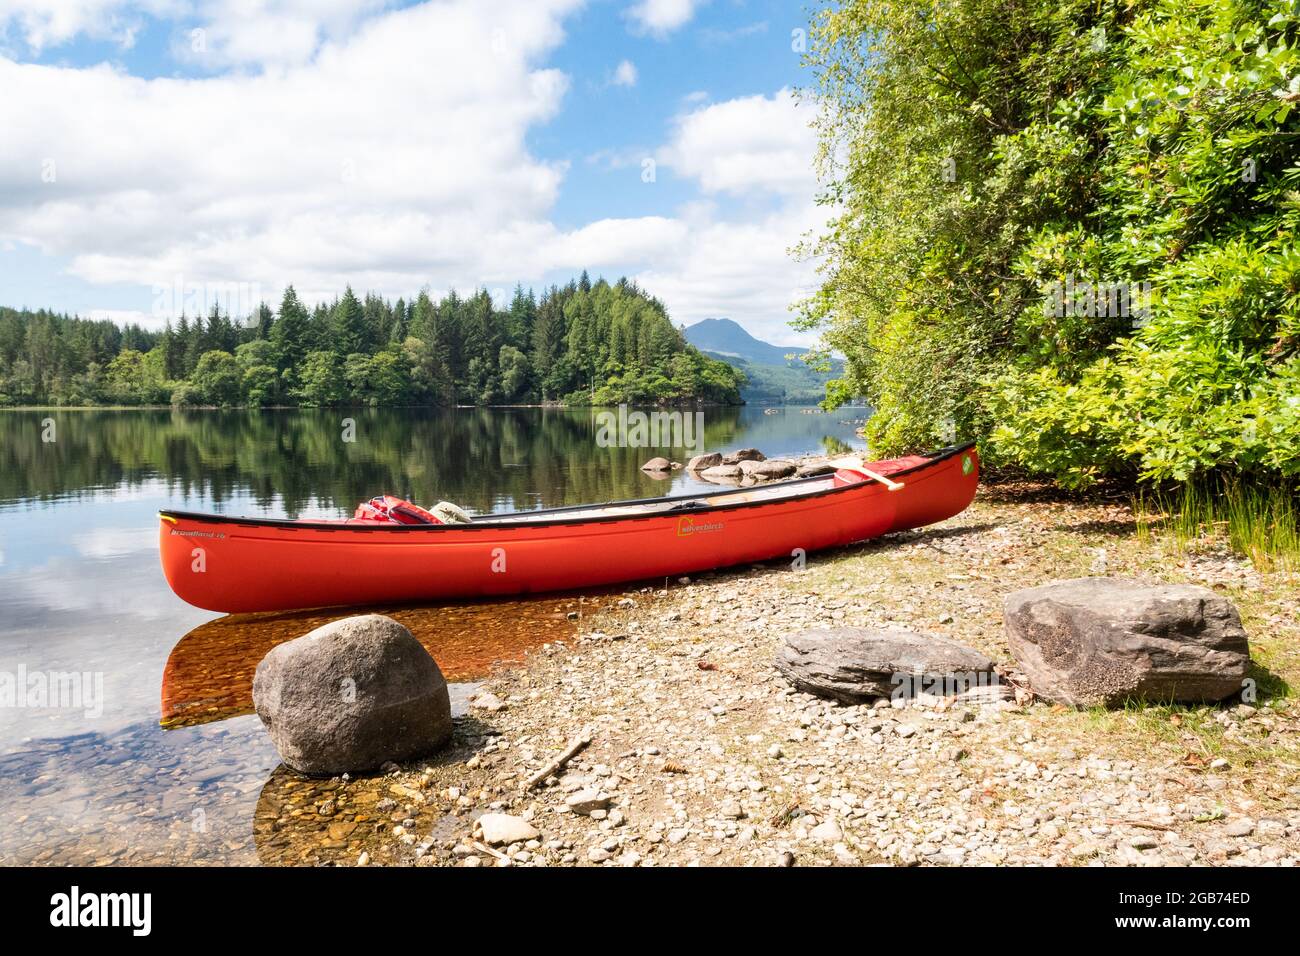 Canoeing on Loch Ard with Ben Lomond in the distance, Loch Lomond and the Trossachs National Park, Aberfoyle, Stirling, Scotland, UK Stock Photo